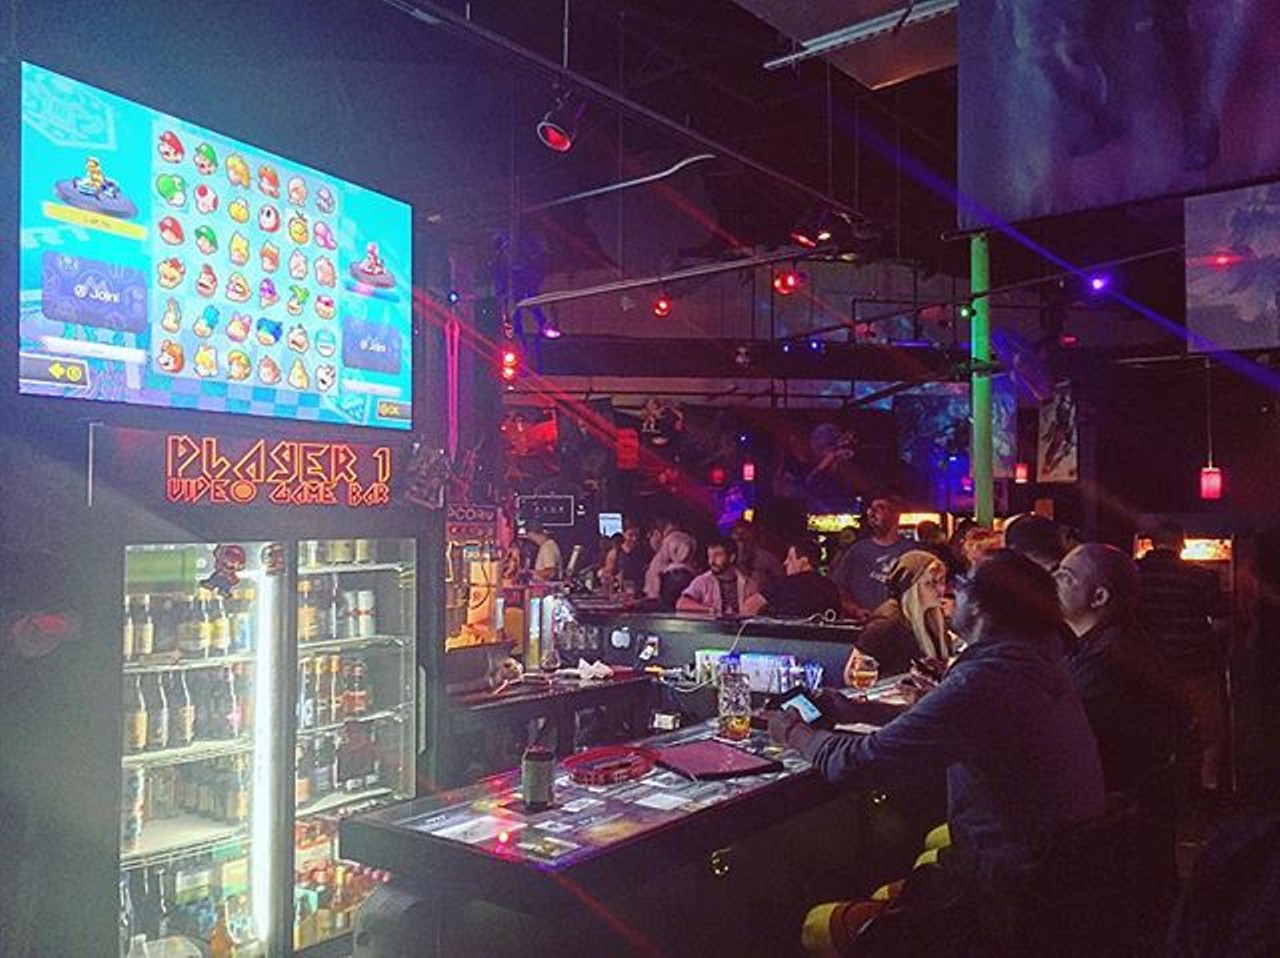 Combine booze and video games at Player 1
8562 Palm Pkwy, Orlando, 407-504-7521
Gaming and drinking come together in the best way at Player 1 Video Game Bar. Drink your favorite ale and play anything from Playstation 4 to classic arcade games all for a cover charge of $5. 
Photo via jorge82/Instagram